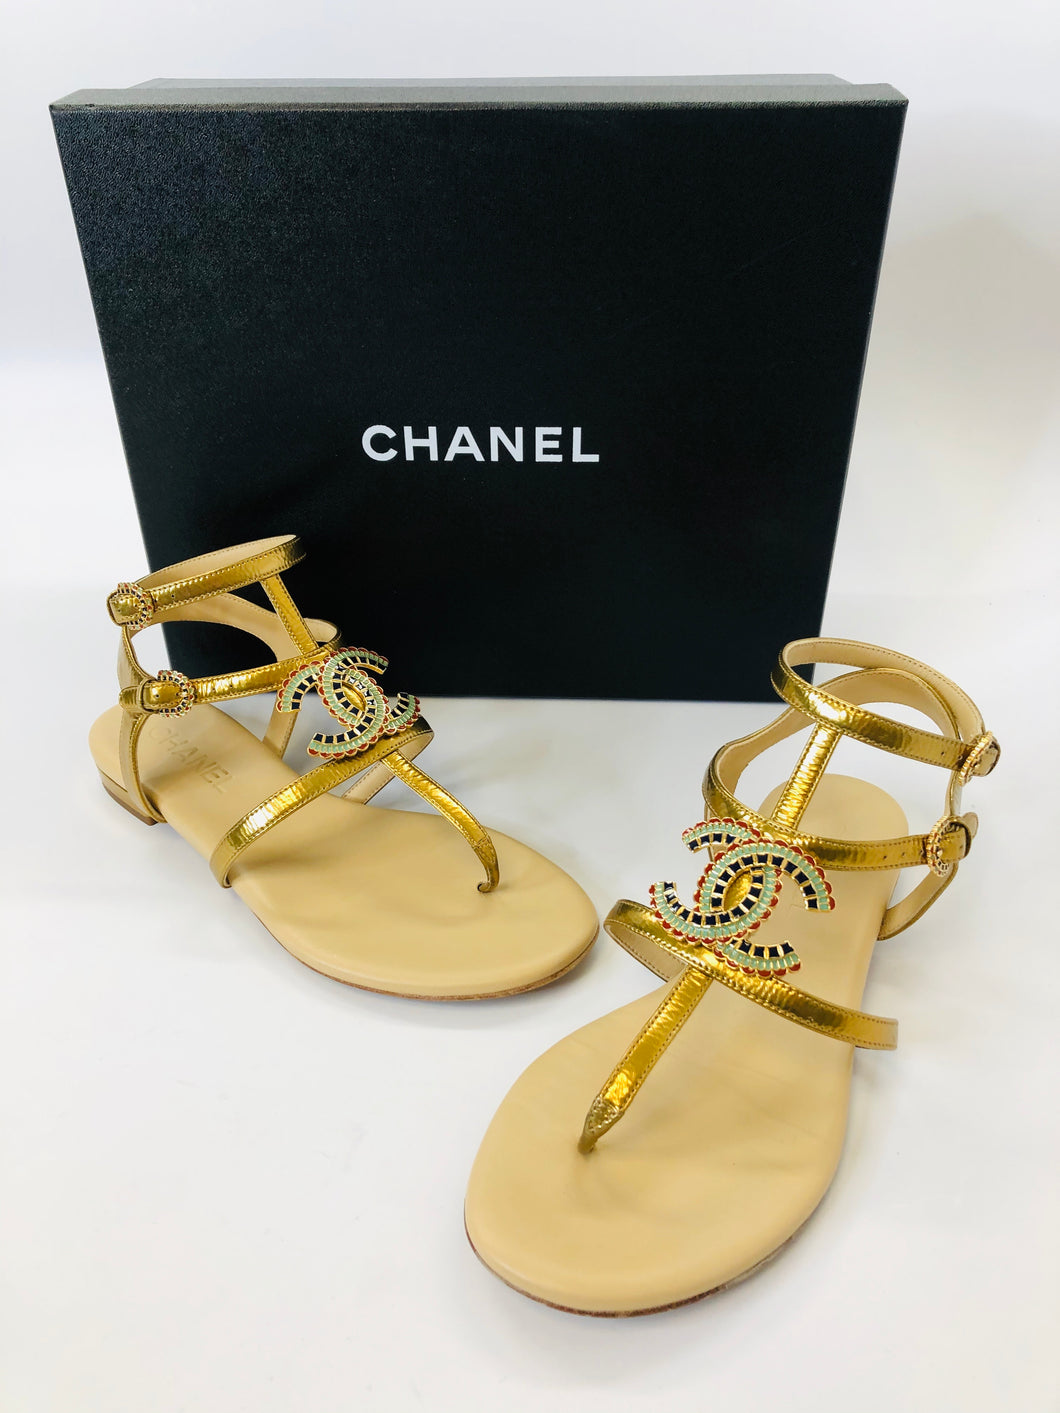 CHANEL Laminated Lambskin CC Thong Sandals size 37 1/2 – JDEX Styles